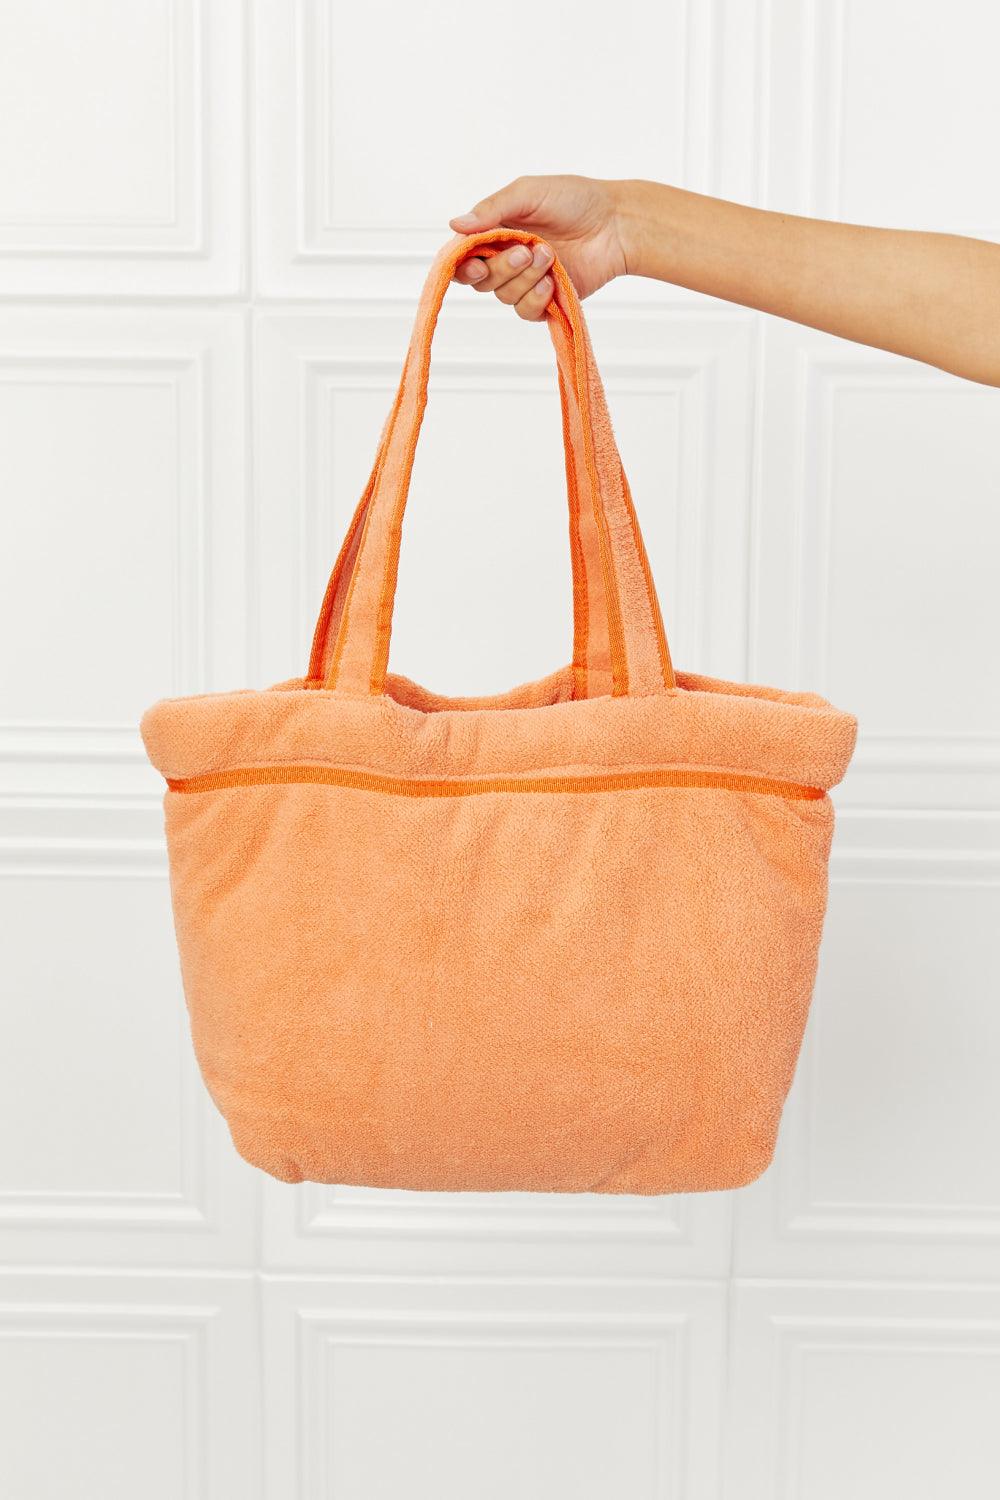 Fame Found My Paradise Tote Bag - The Fiery Jasmine